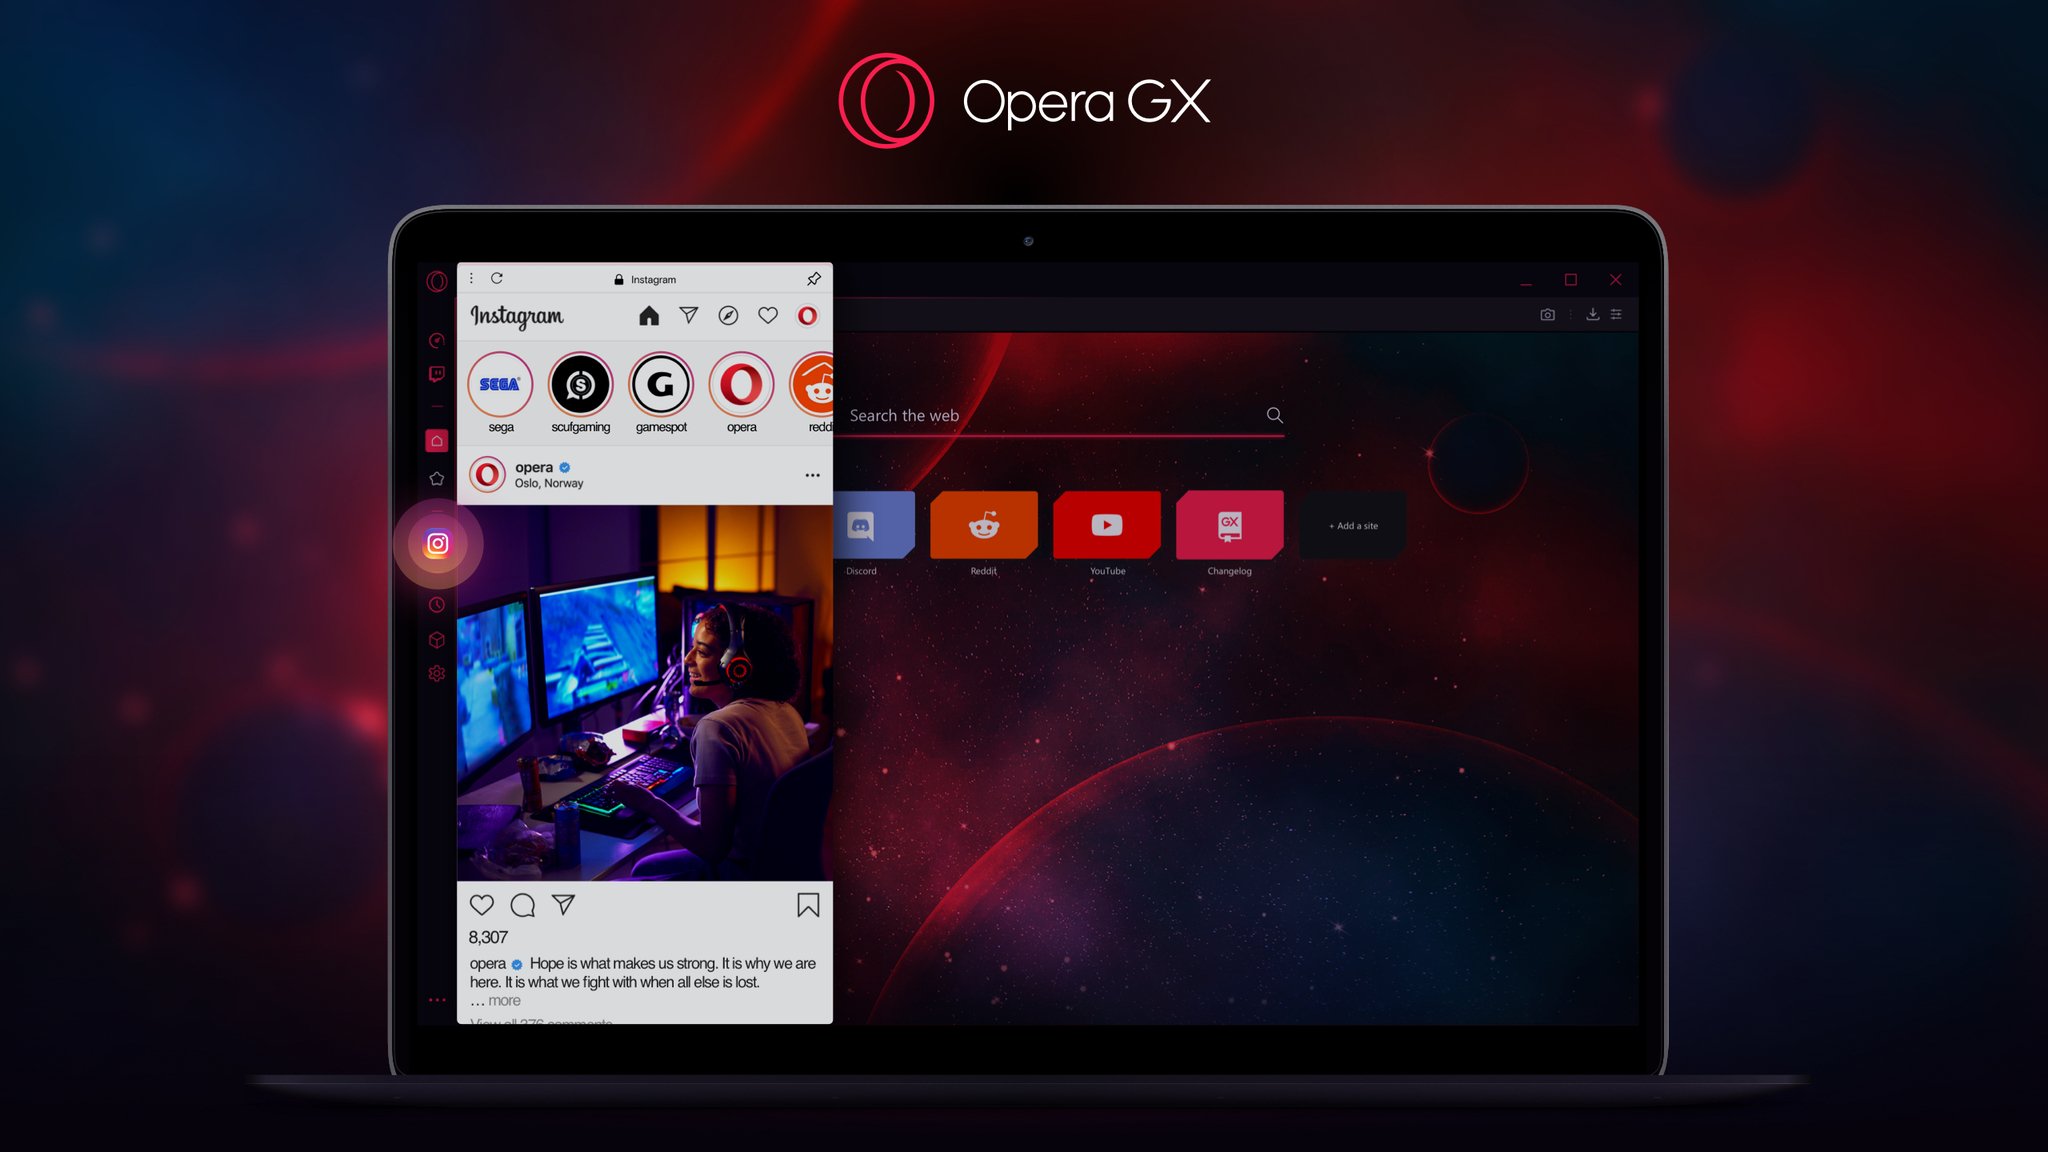 Sign up to get early access to Opera GX, Opera's first gaming